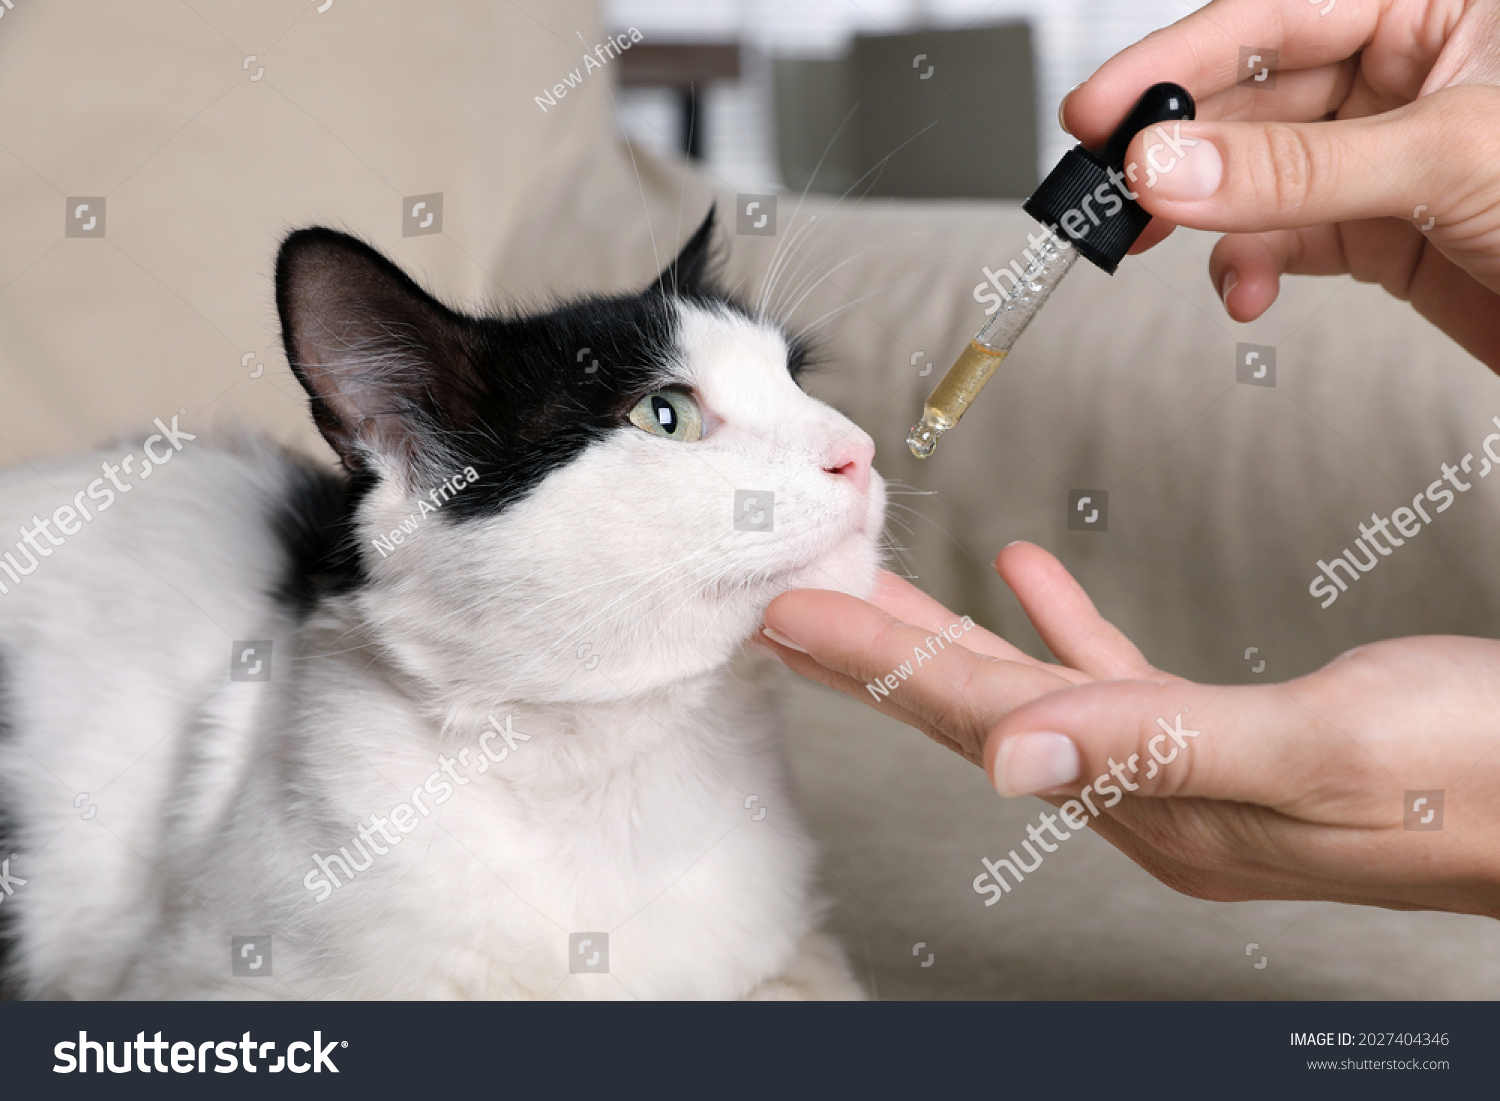 Woman giving tincture to cat at home, closeup #2027404346